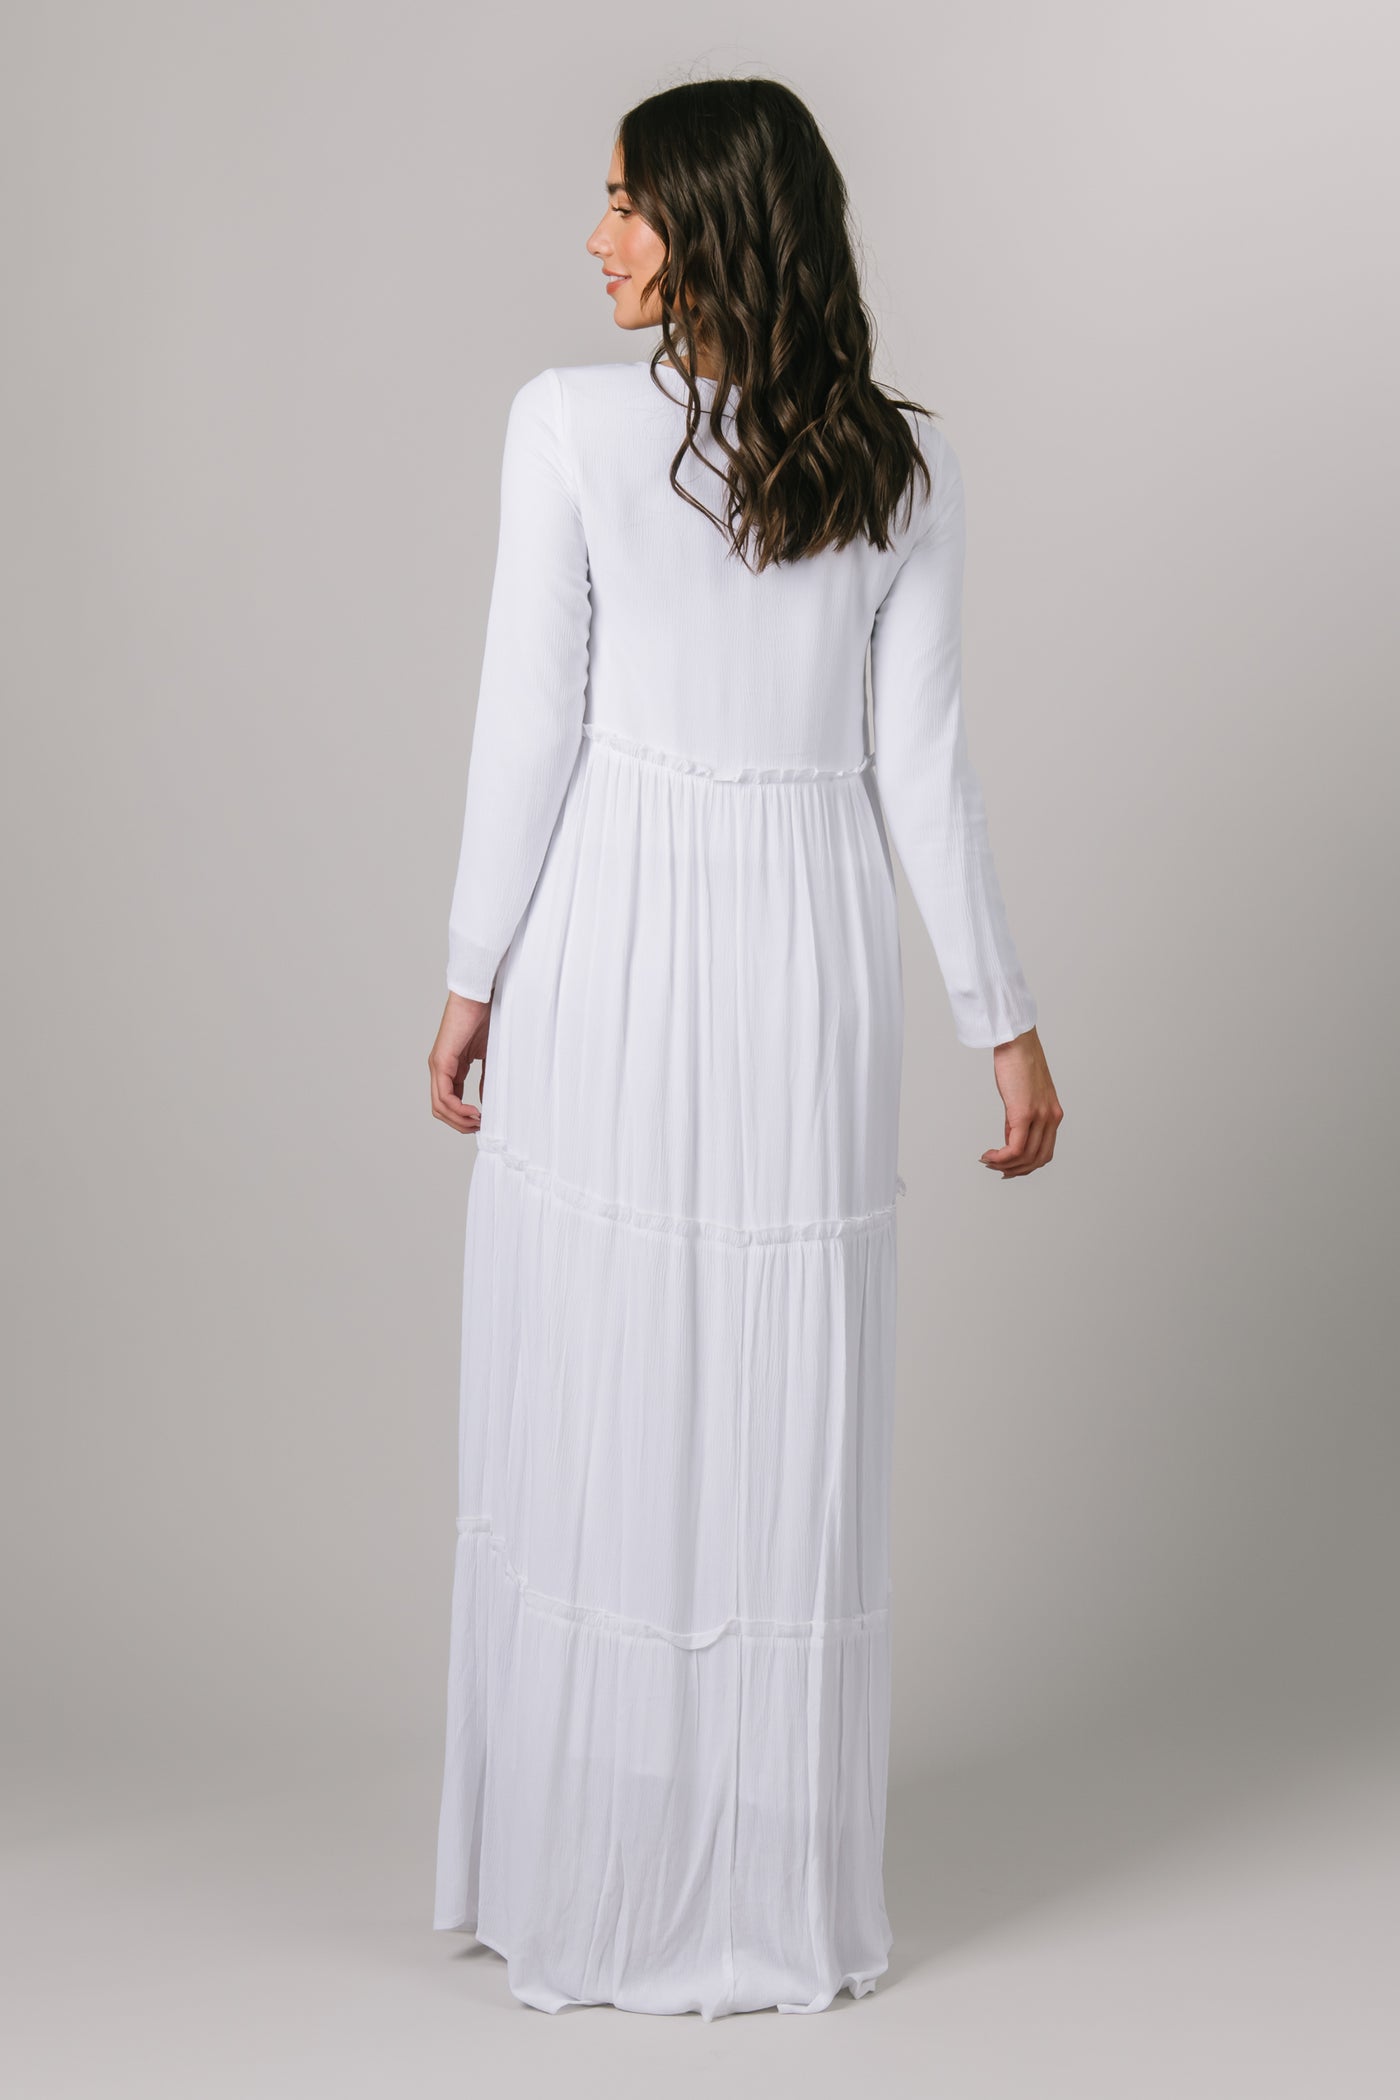 This Temple Dress is so cute! Featuring long sleeves, and a ruffled skirt. - Modest Temple Dresses - Modest Dresses